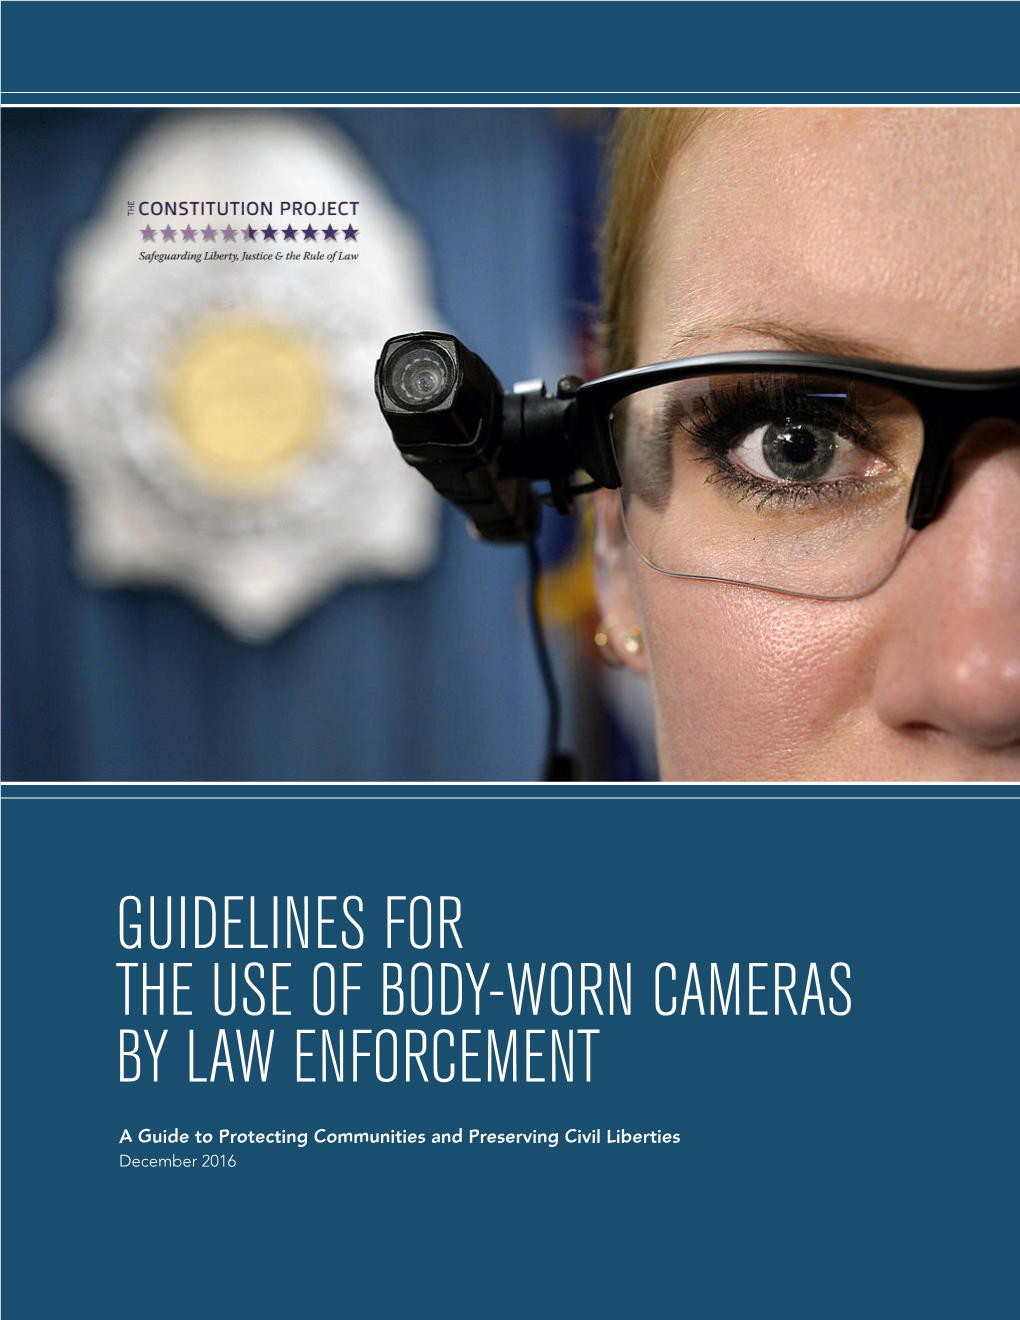 Guidelines for the Use of Body-Worn Cameras by Law Enforcement